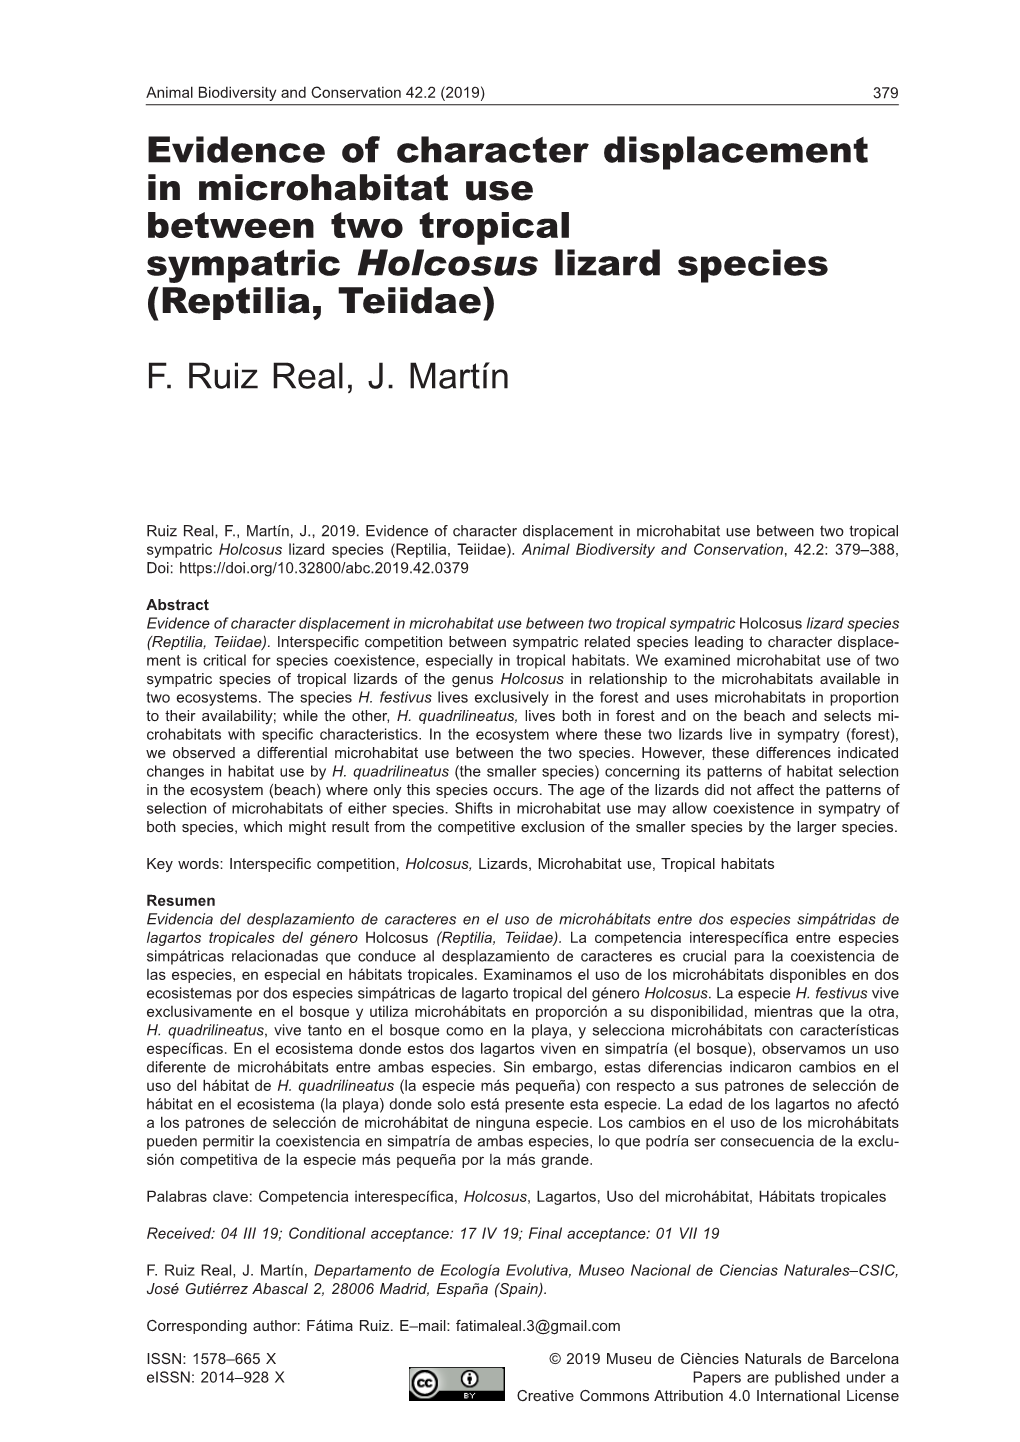 Evidence of Character Displacement in Microhabitat Use Between Two Tropical Sympatric Holcosus Lizard Species (Reptilia, Teiidae)